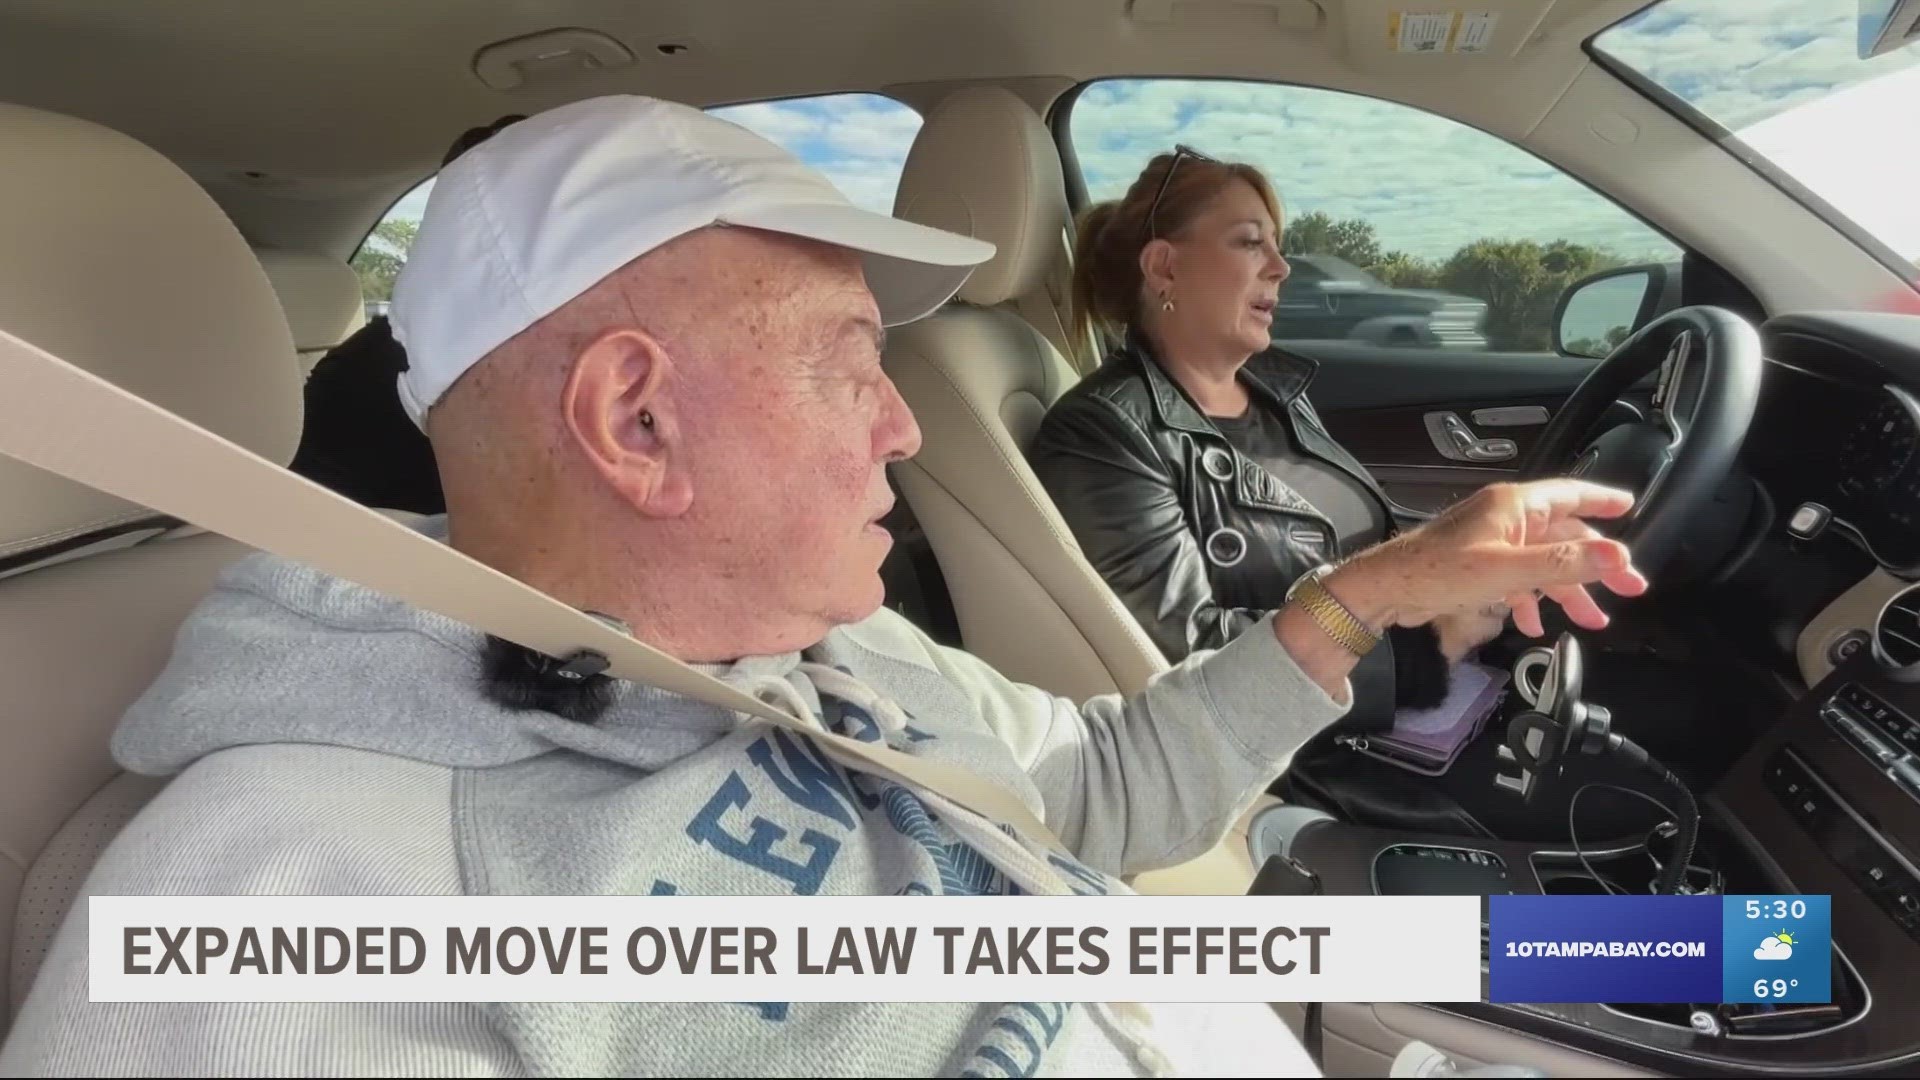 The original law requires Floridians to move over for first responders and city vehicles. The enhanced law will have them move over for more vehicles.